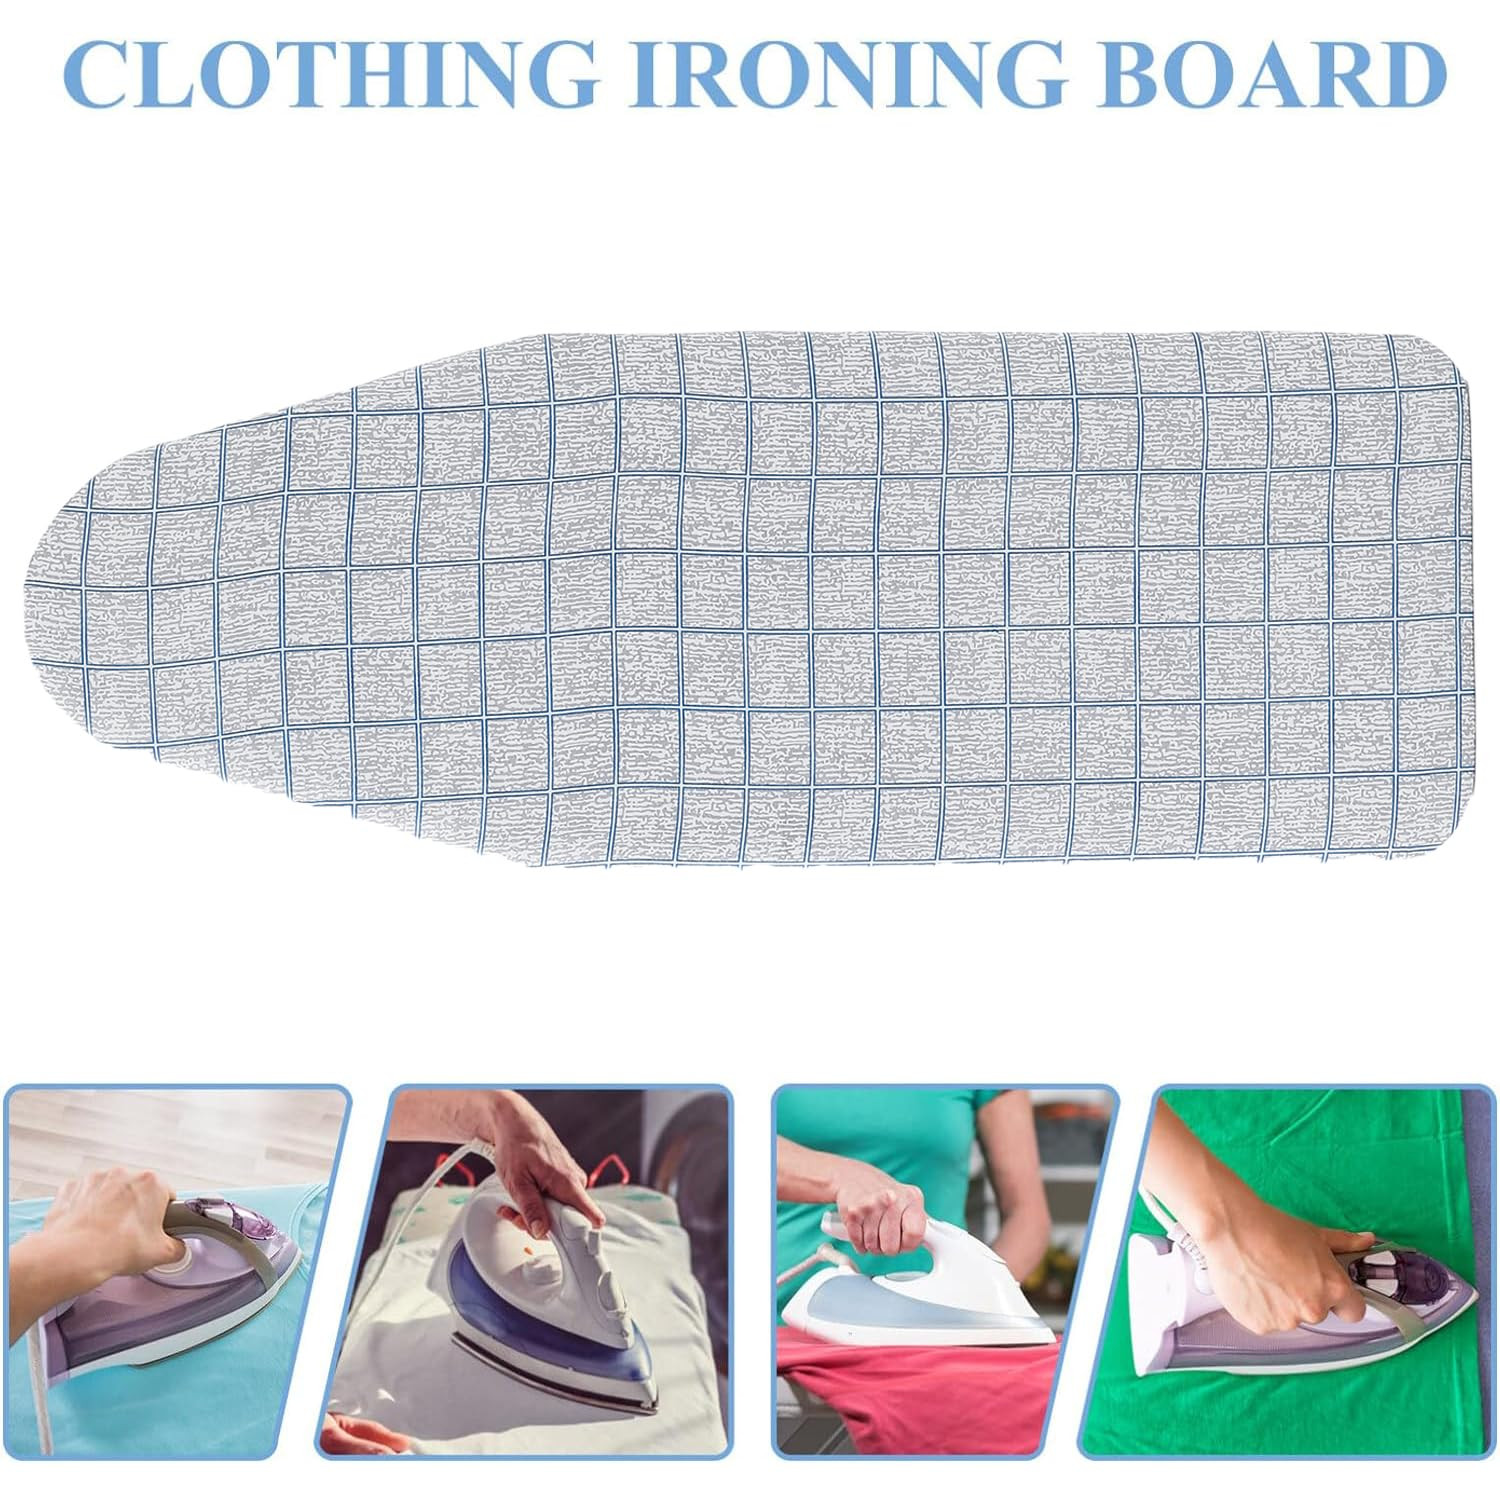 Kuber Industries Tabletop Ironing Board|Ironing Stand For Clothes|Press Table Stand For Home (Grey)